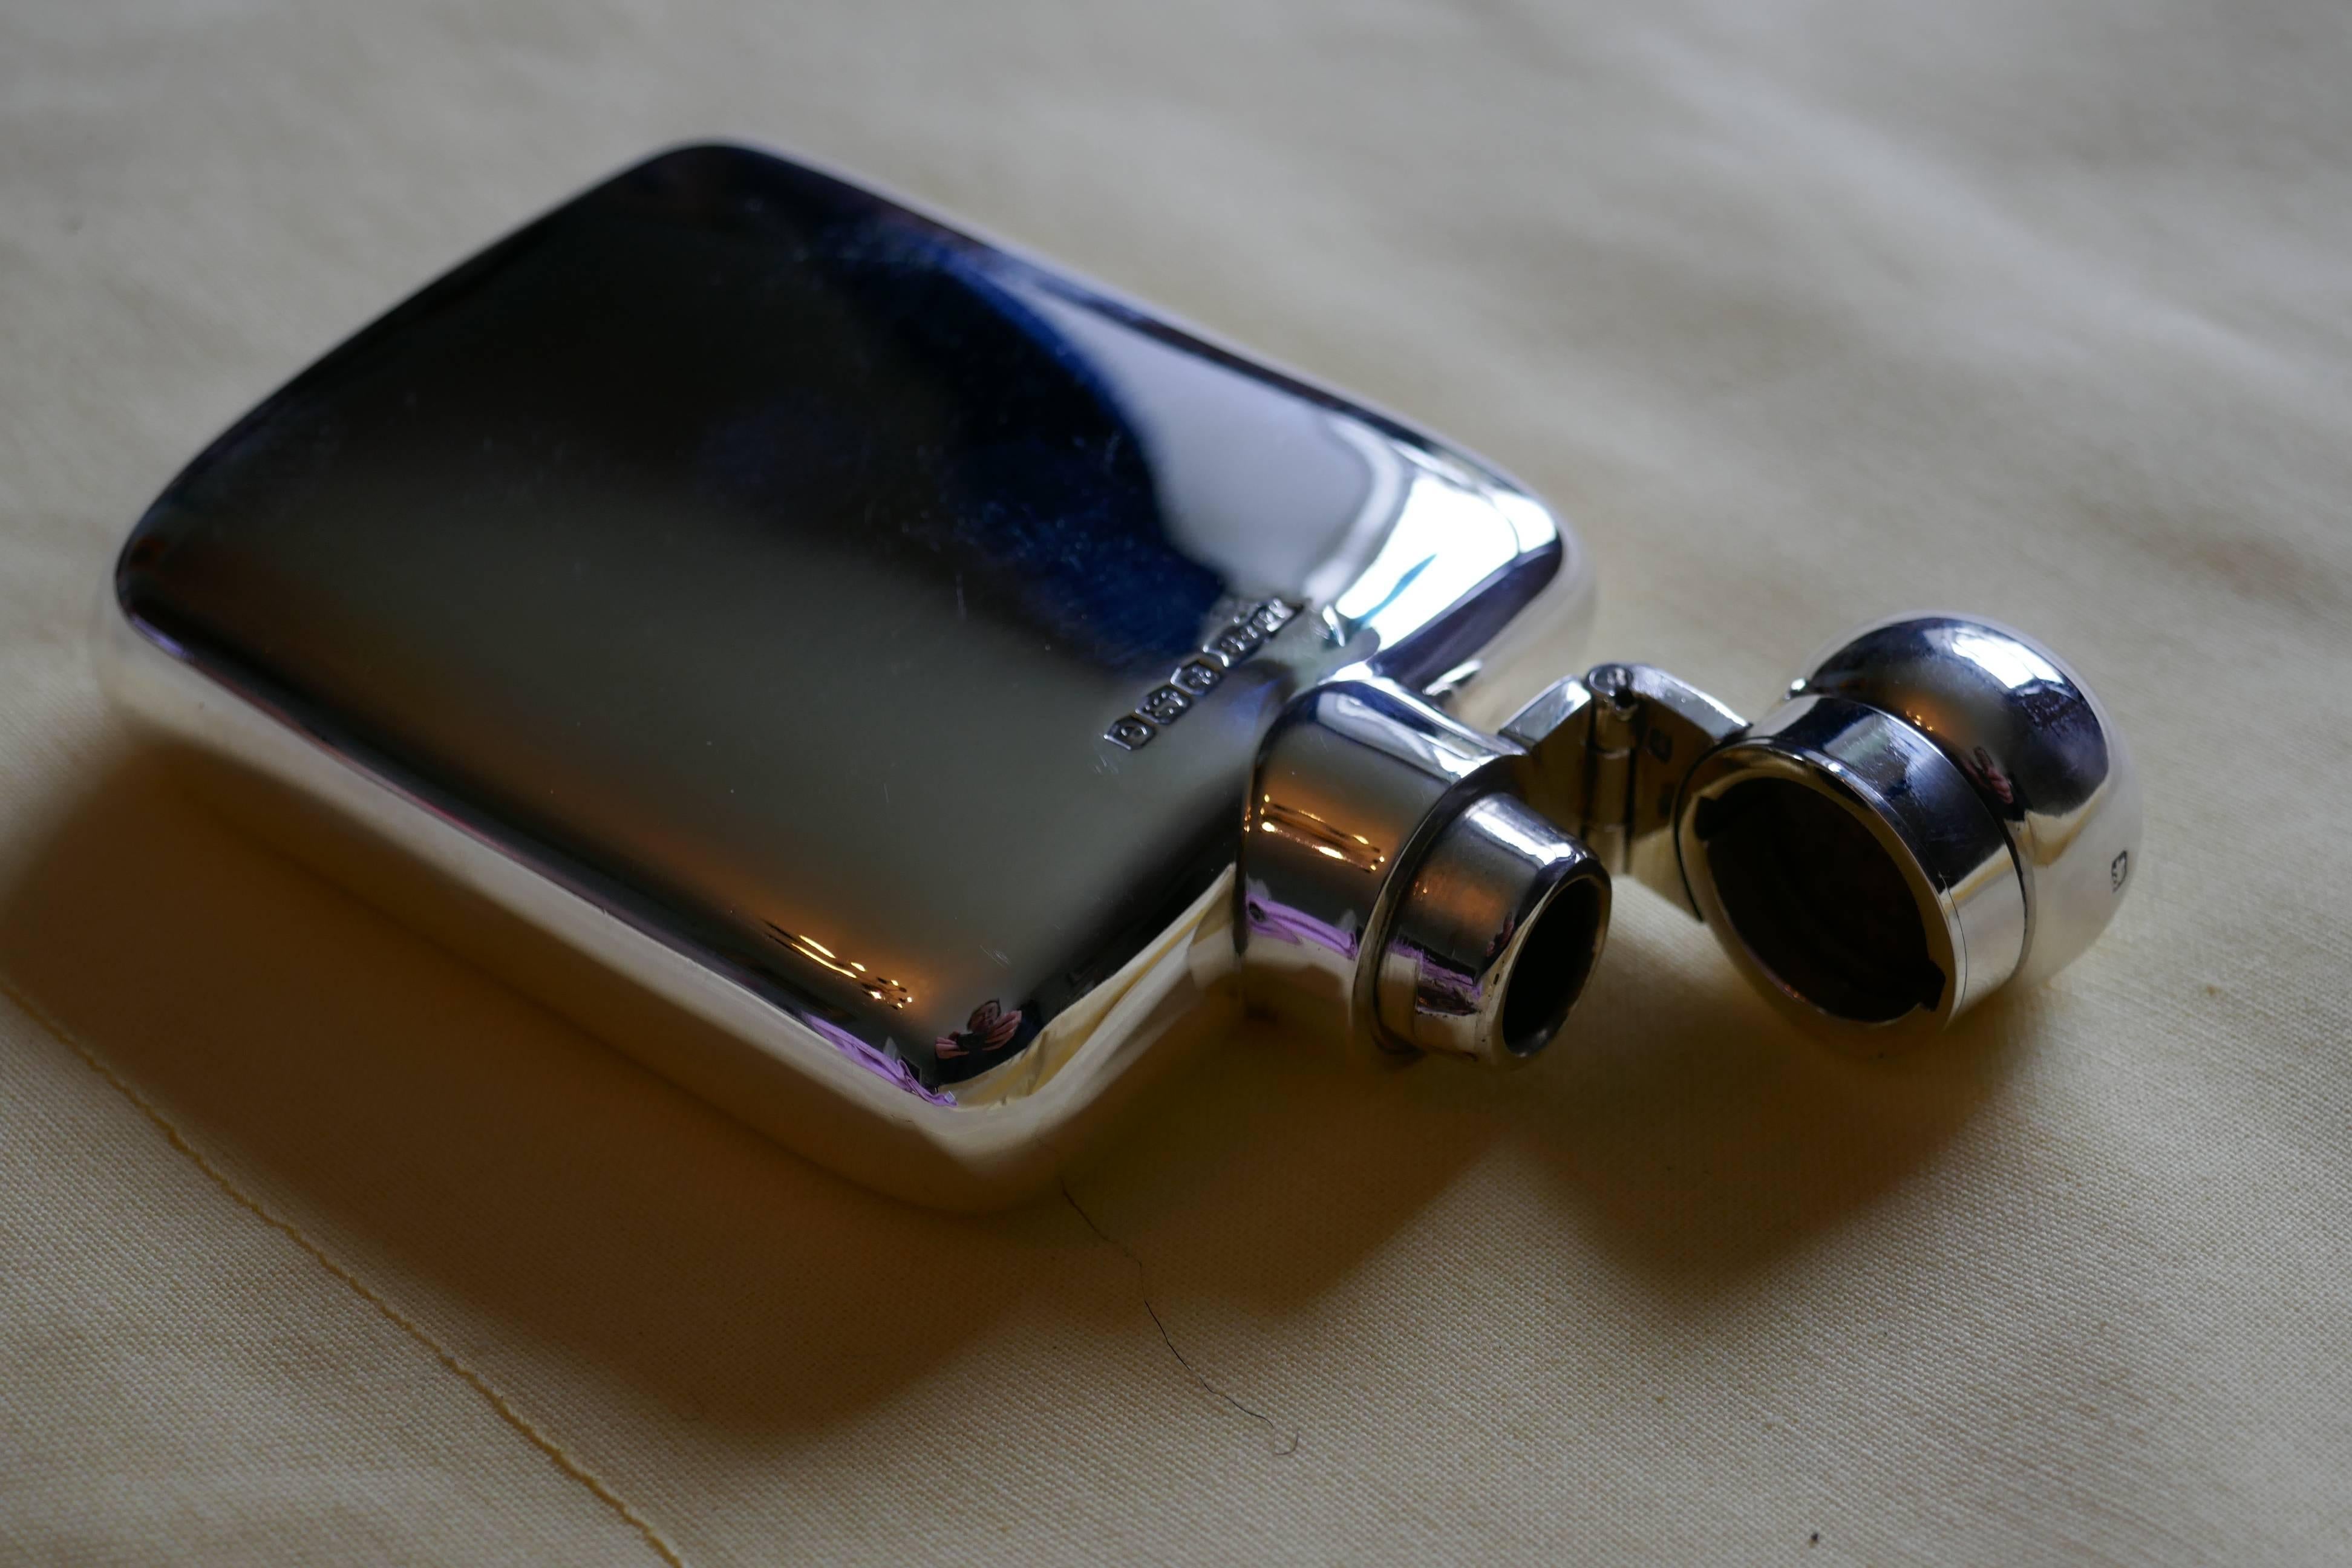 Lovely Silver Hall Marked Flask, James Dixon & sons Date 1922

A lovely piece, the flask has a rounded shape with no sharp corners, making it ideal to keep in a small pocket or handbag, the lid is hinged with a screw grip.

The flask is in good